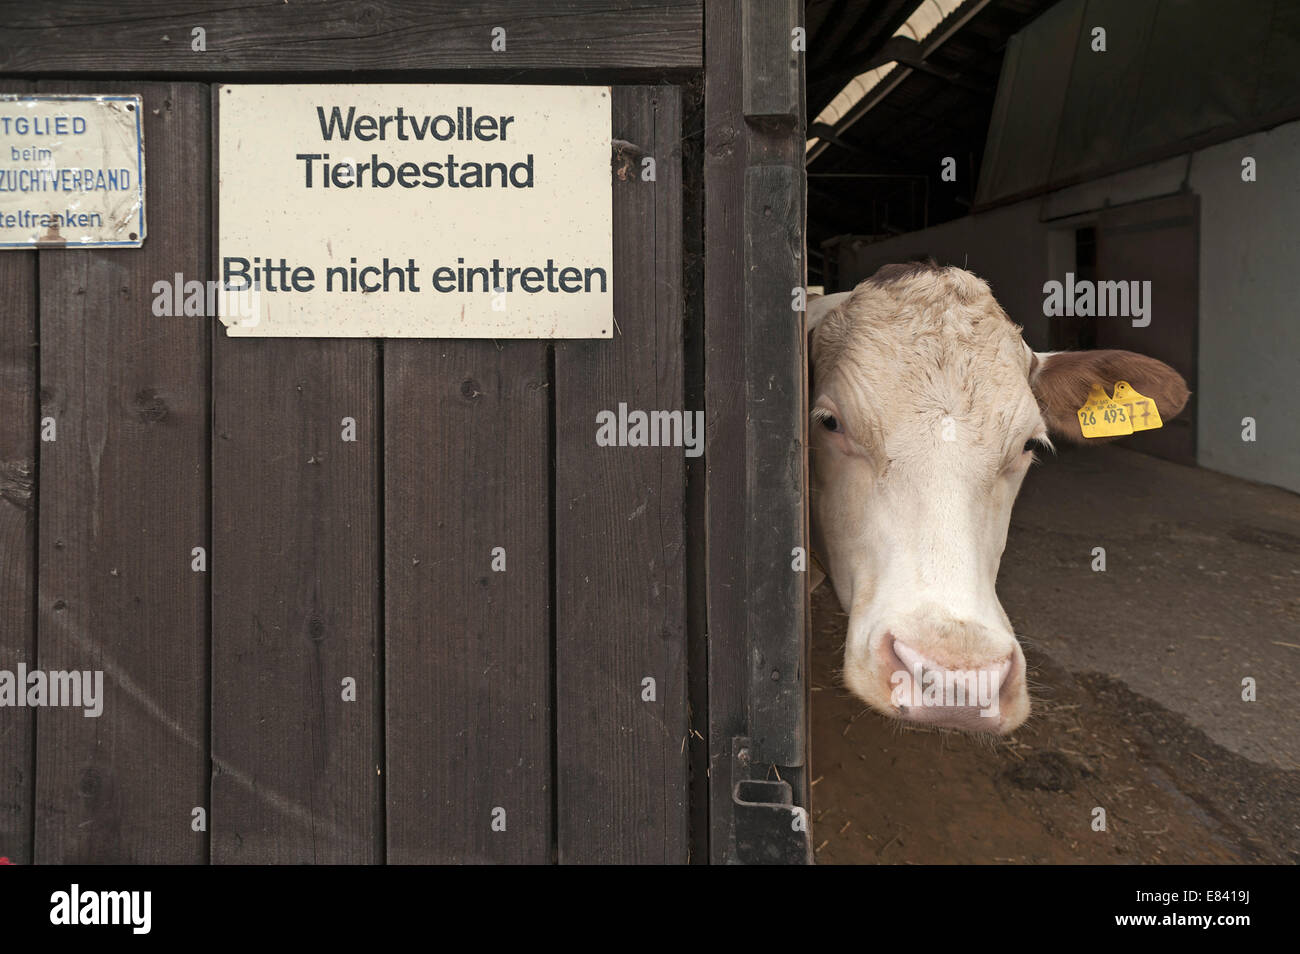 Dairy cow looking out of a barn, left sign 'wertvoller Tierbestand', German for 'valuable livestock', Bavaria, Germany Stock Photo